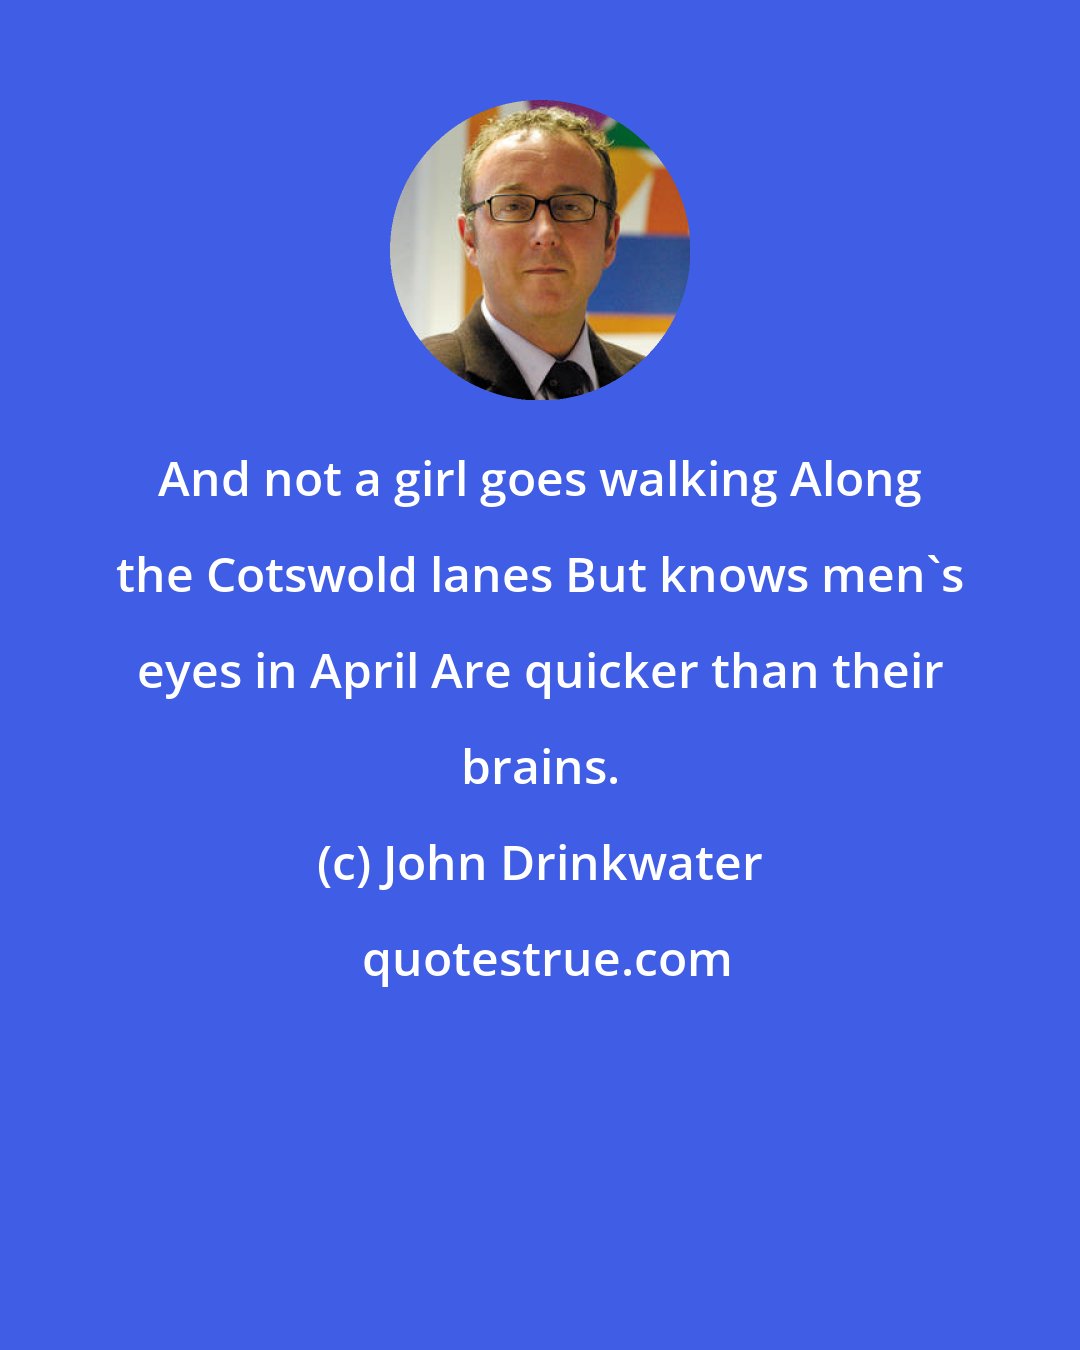 John Drinkwater: And not a girl goes walking Along the Cotswold lanes But knows men's eyes in April Are quicker than their brains.